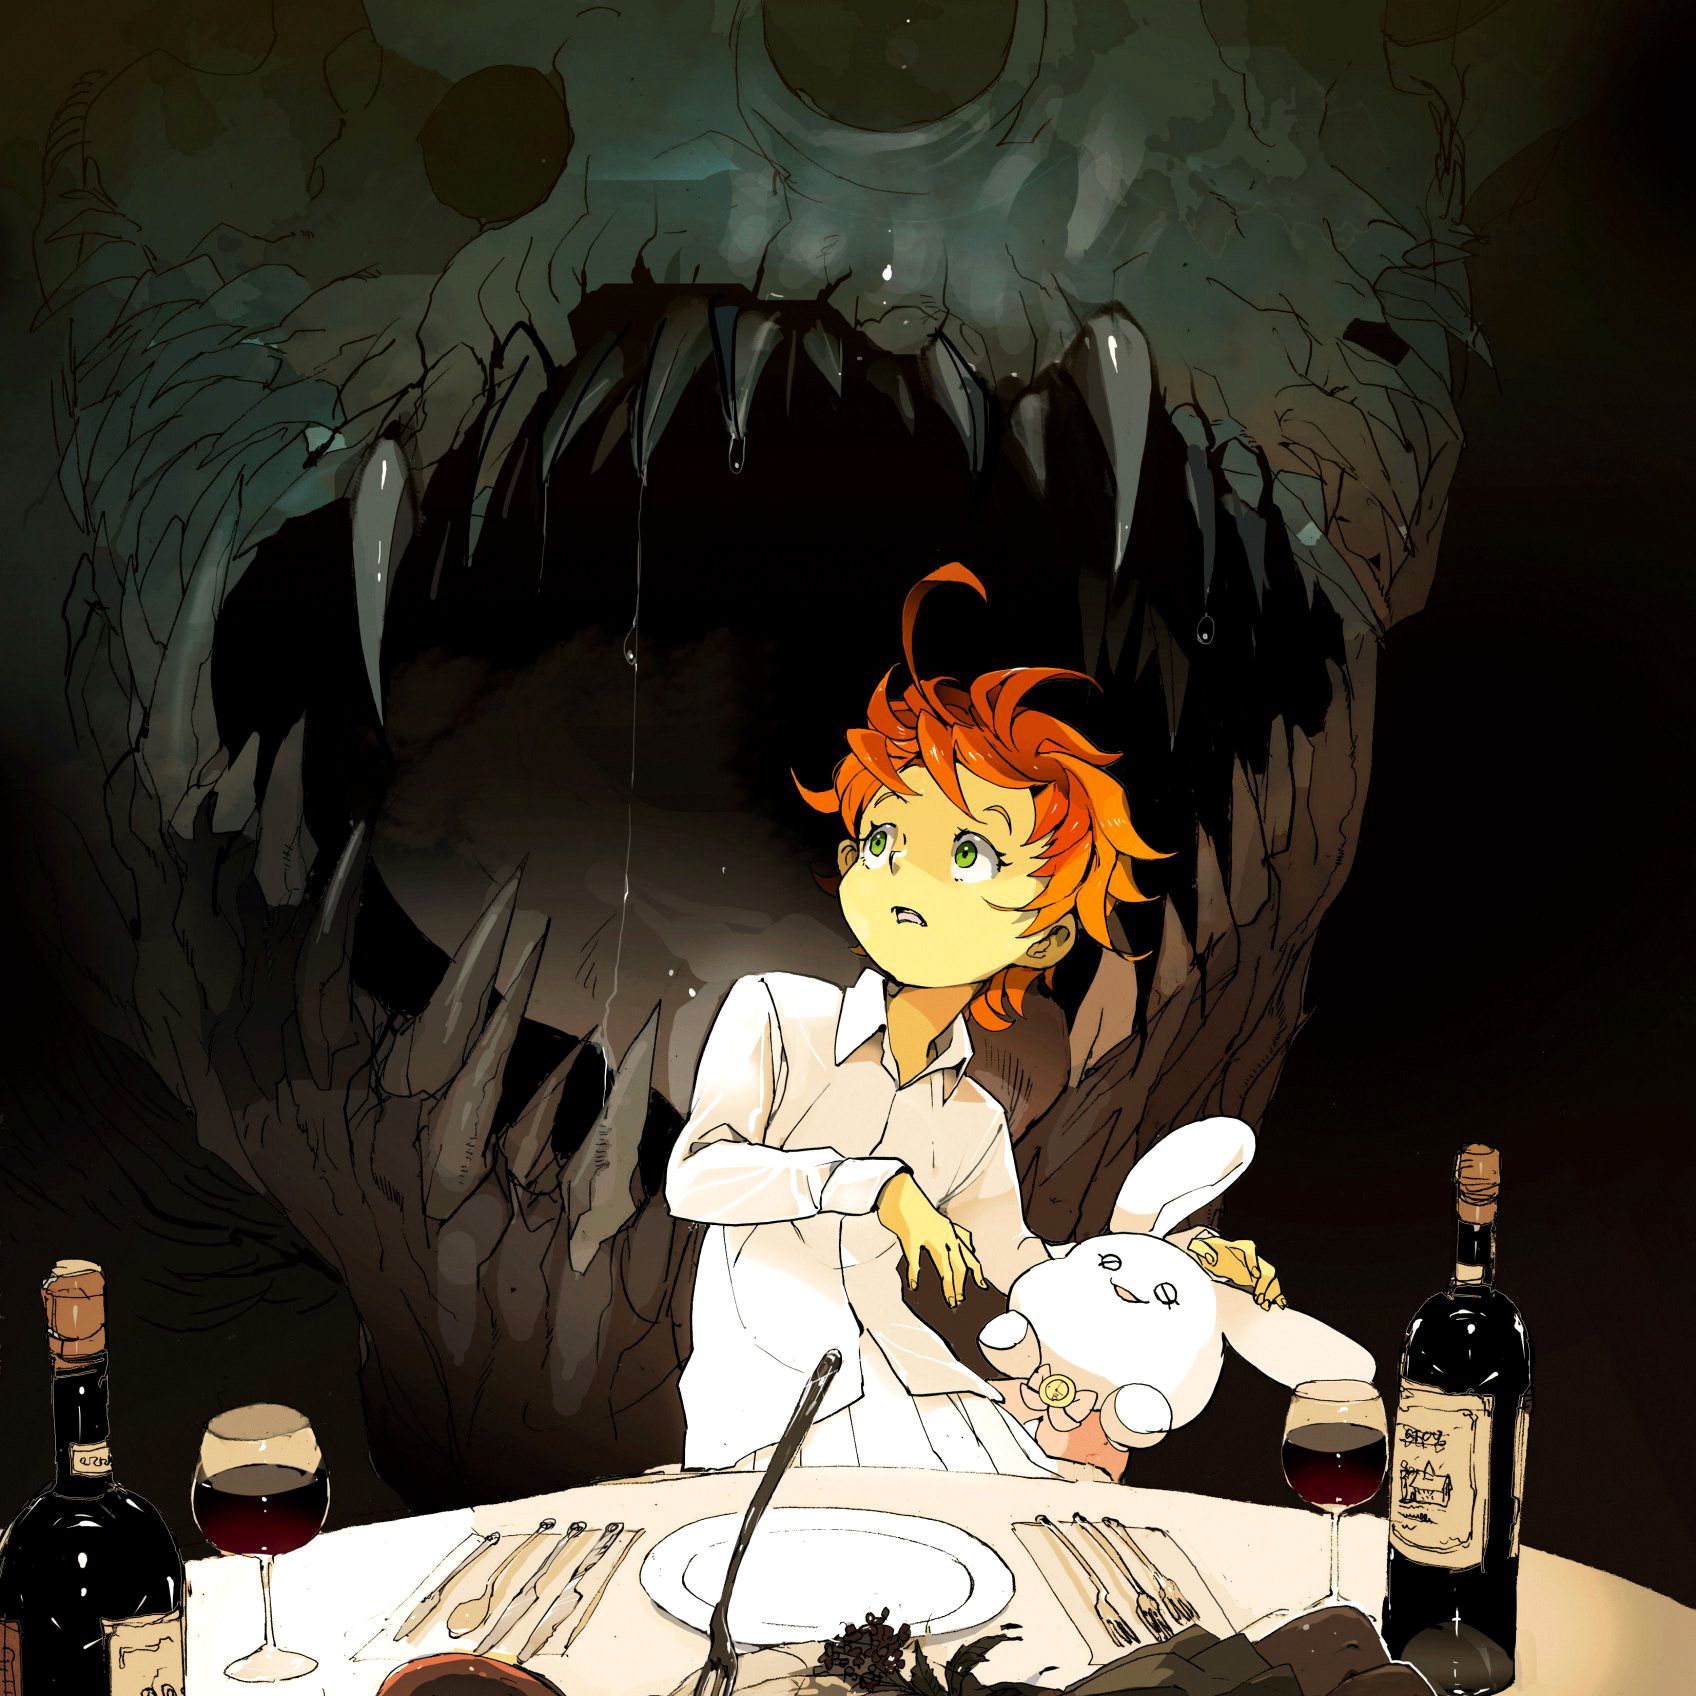 The Promised Neverland - Promised Neverland , HD Wallpaper & Backgrounds